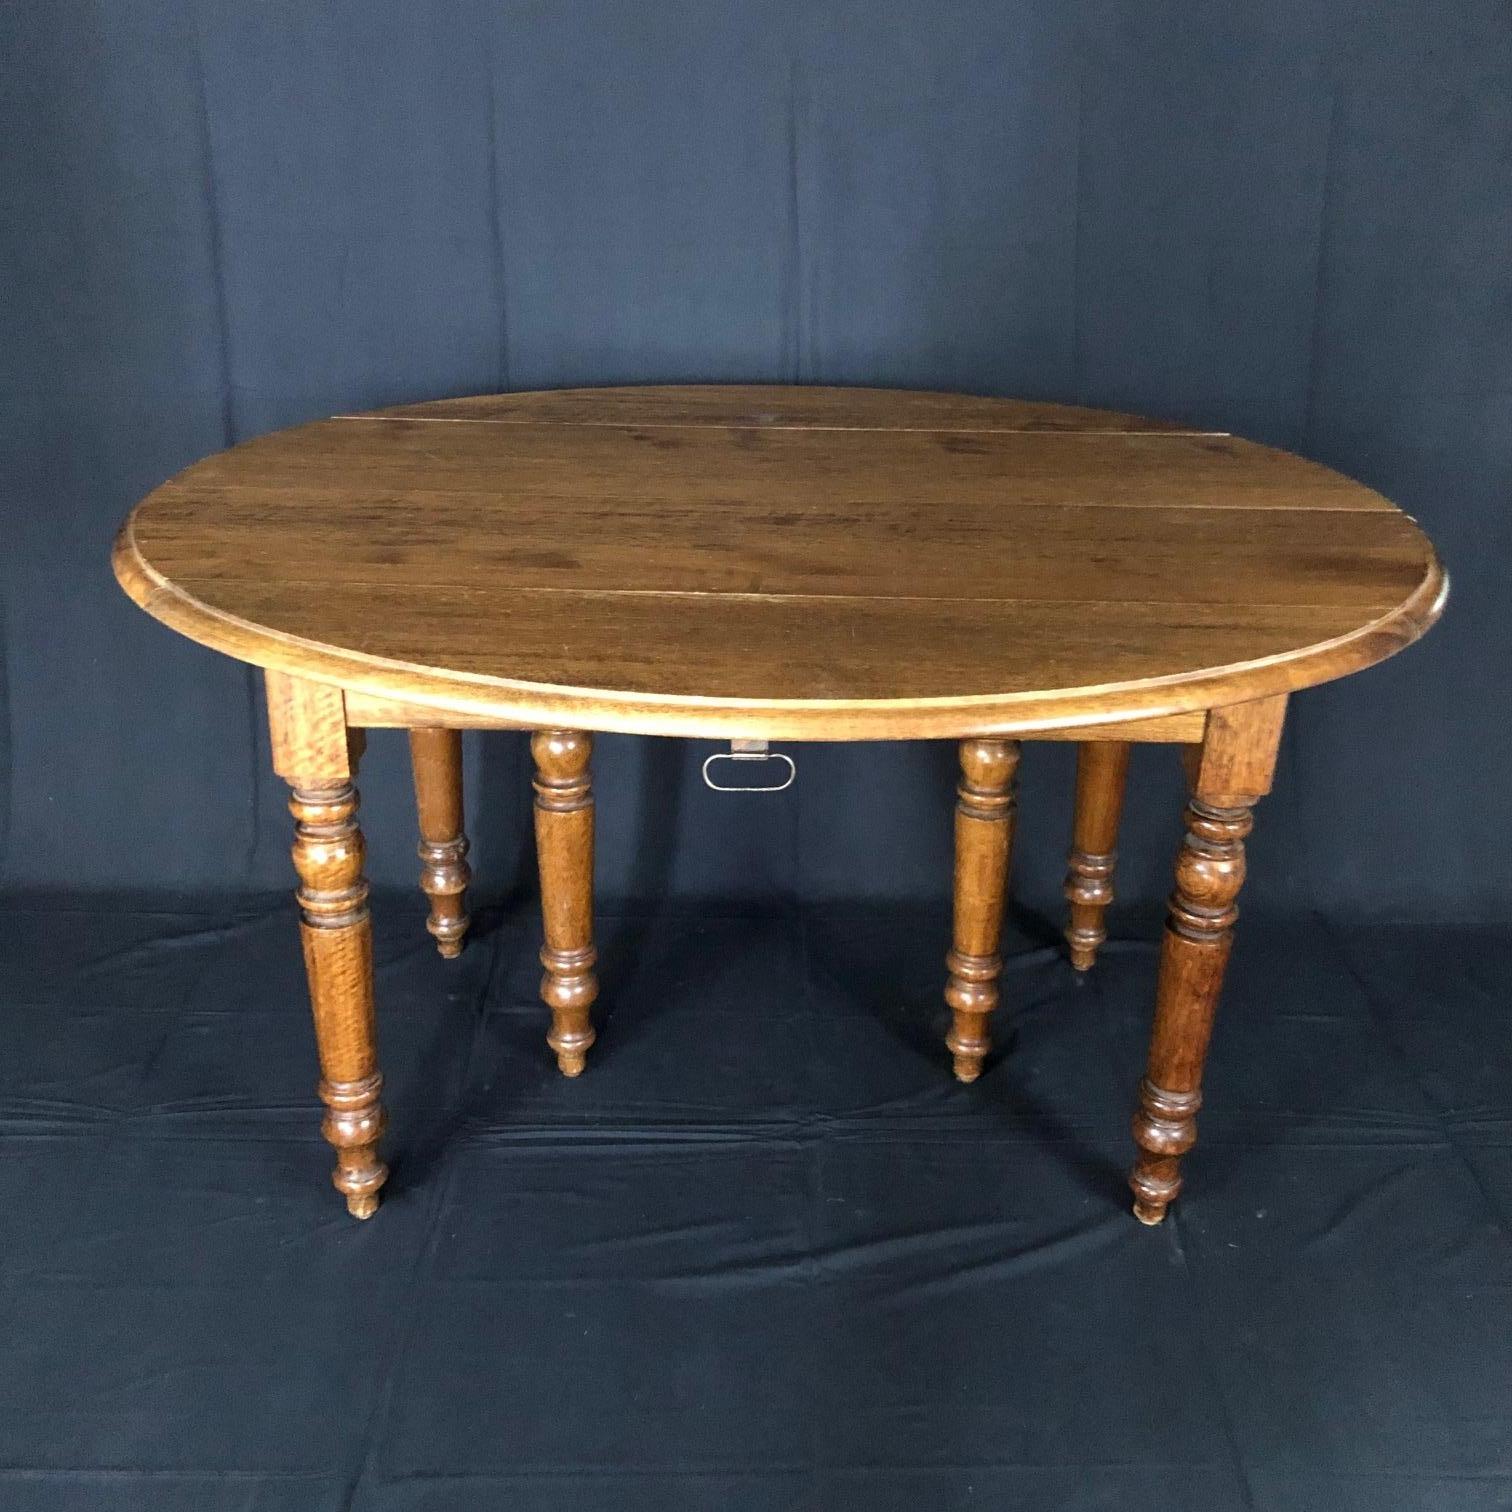 French Country Versatile 19th Century Walnut Dropleaf Dining Table with 4 Leaves 5